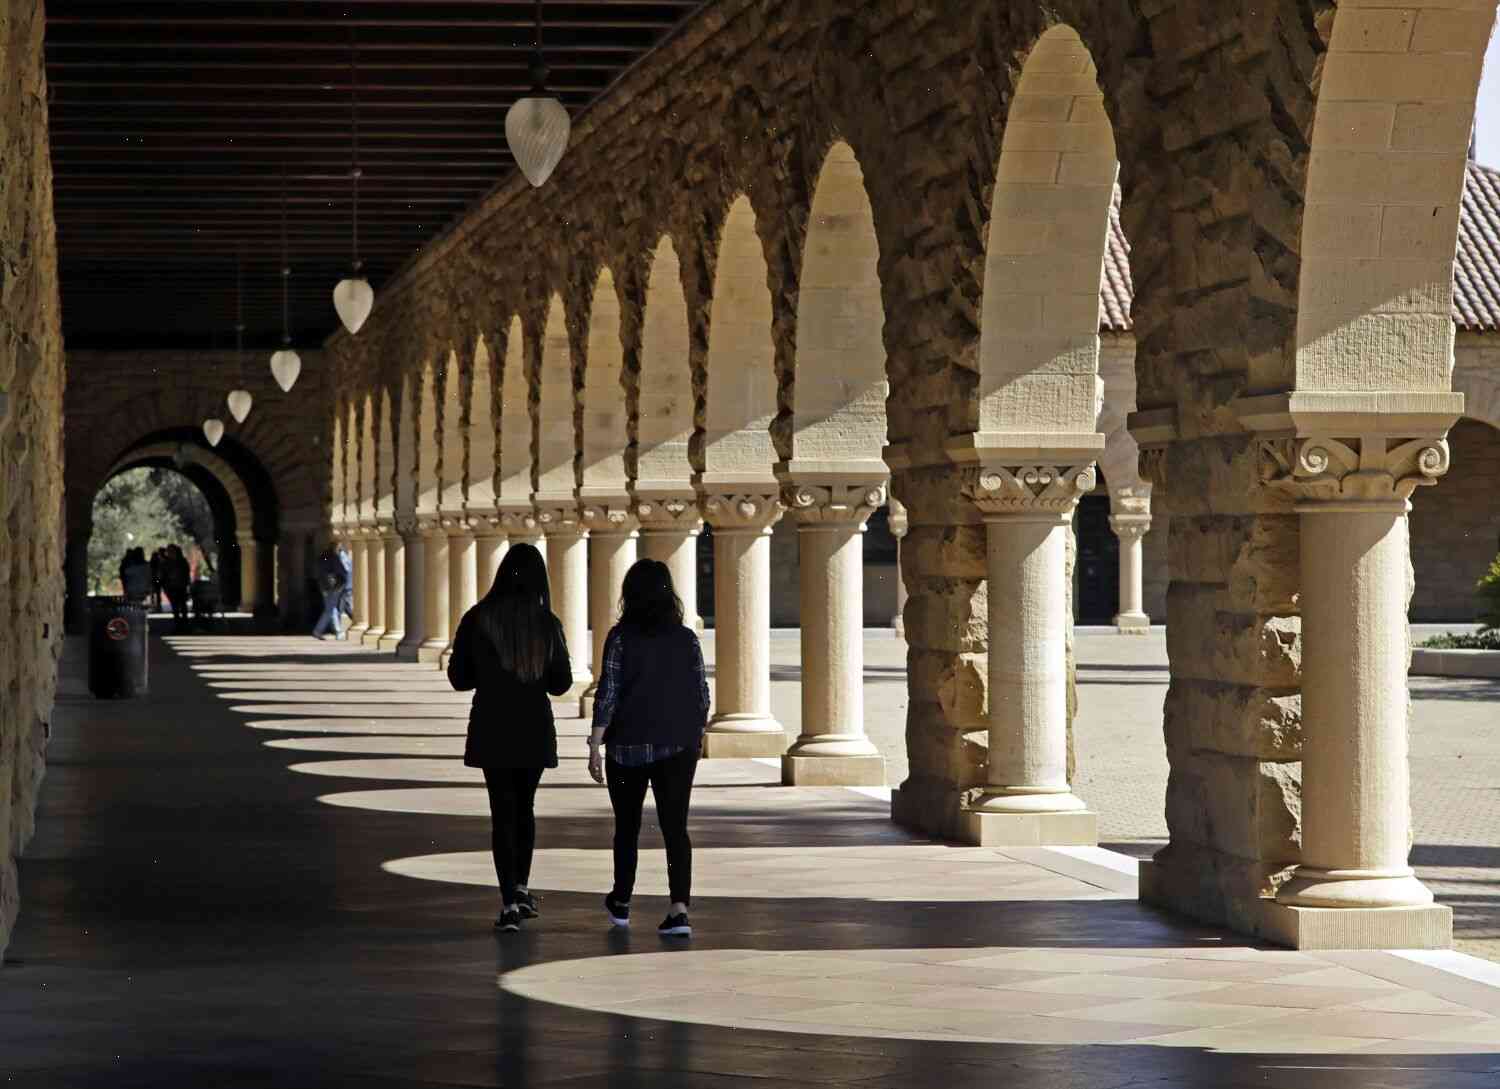 St. Mary’s College in San Jose wants to build a new campus